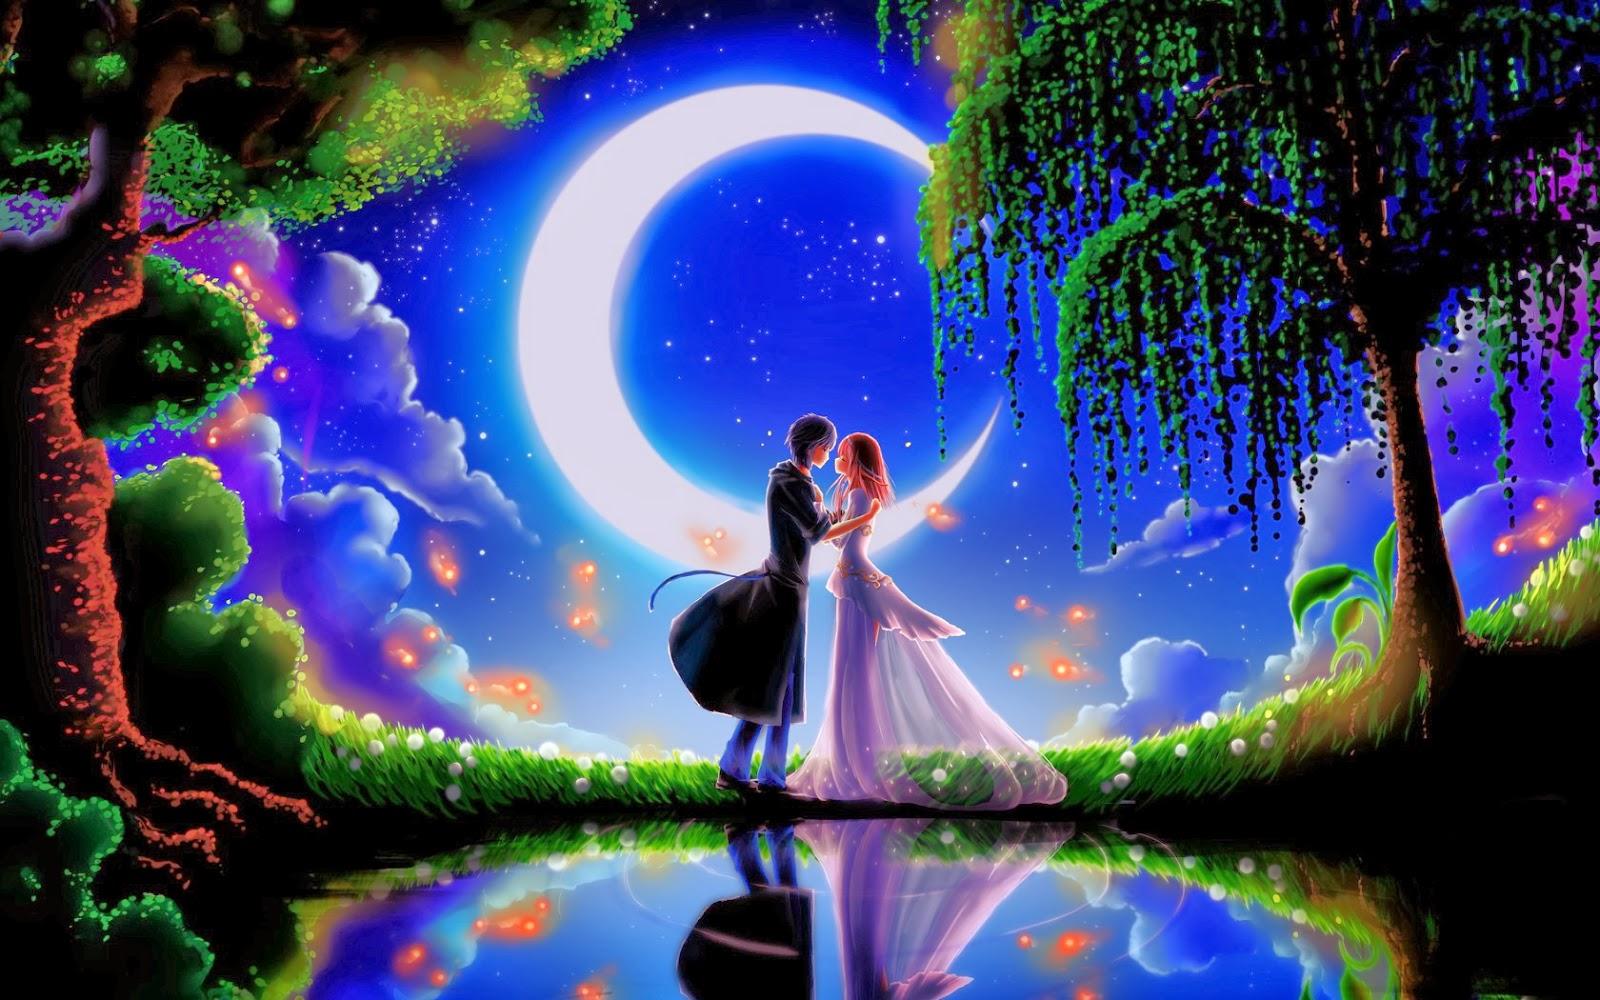 Romantic Love Picture for her and Kiss, Couples Dance